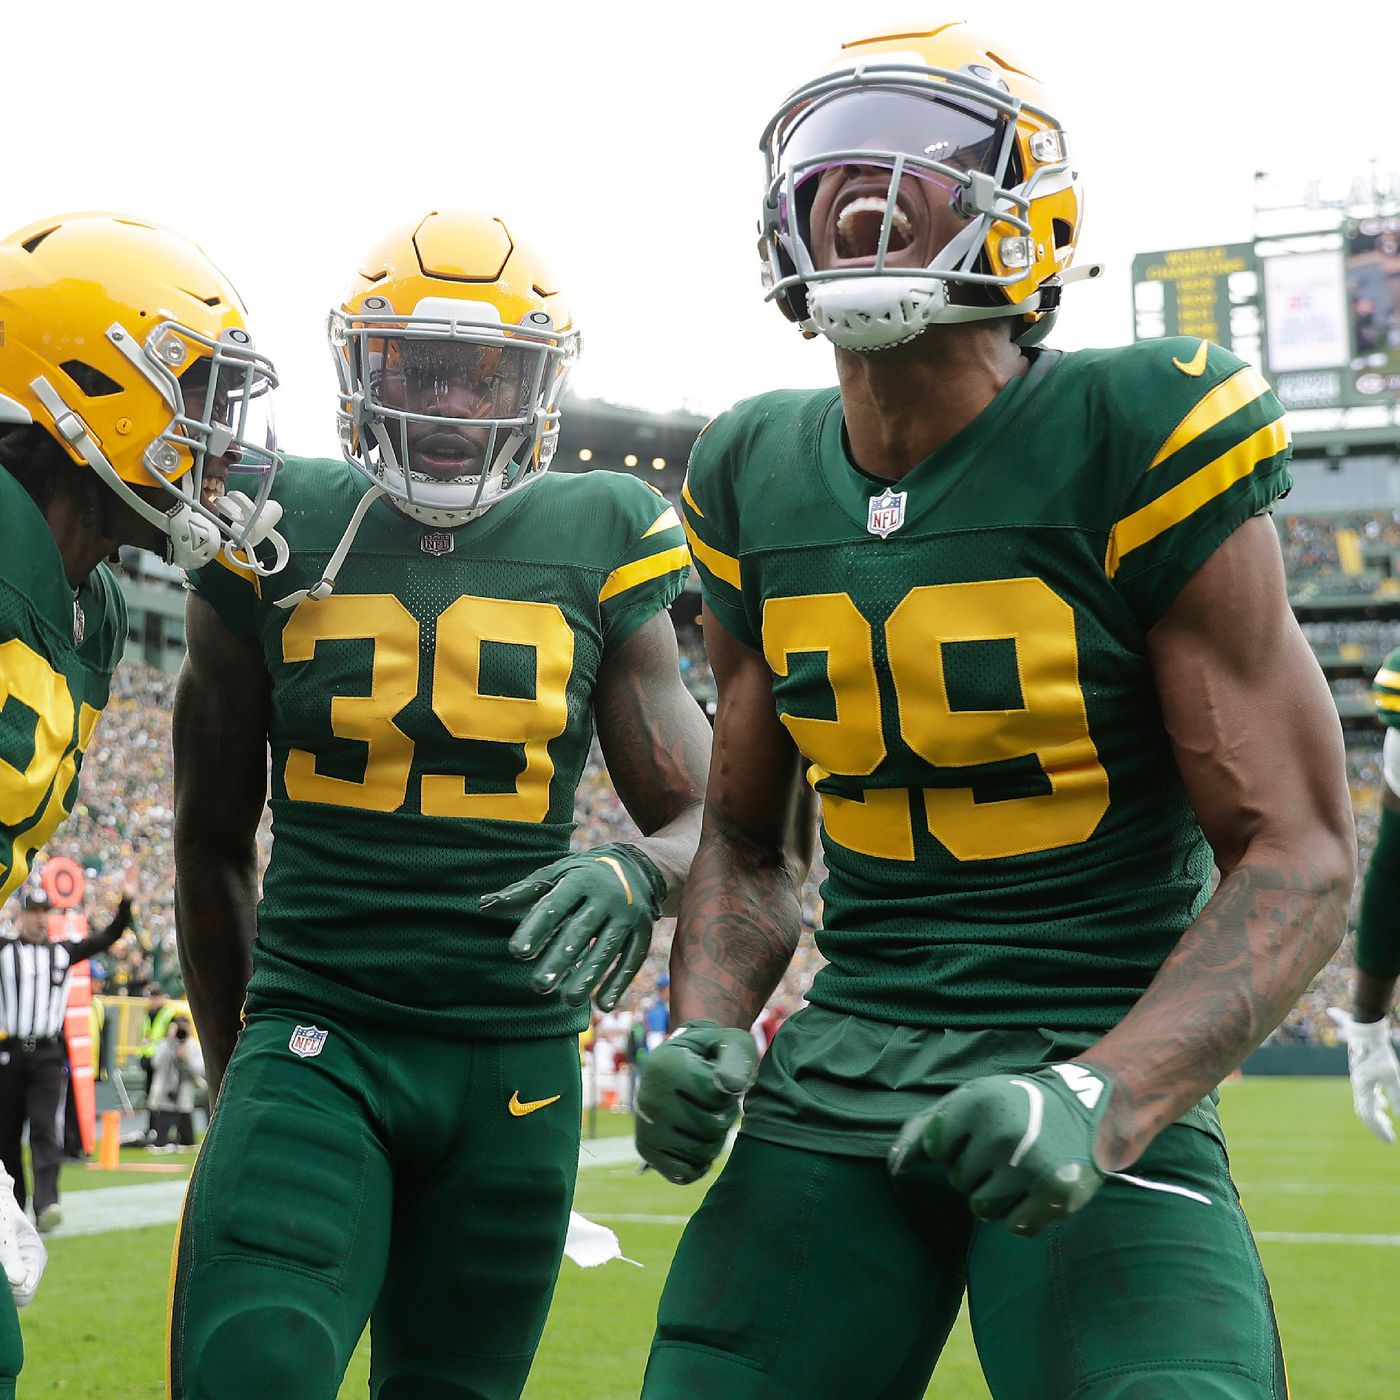 Green Bay Packers to wear alternate uniforms vs New York Jets in